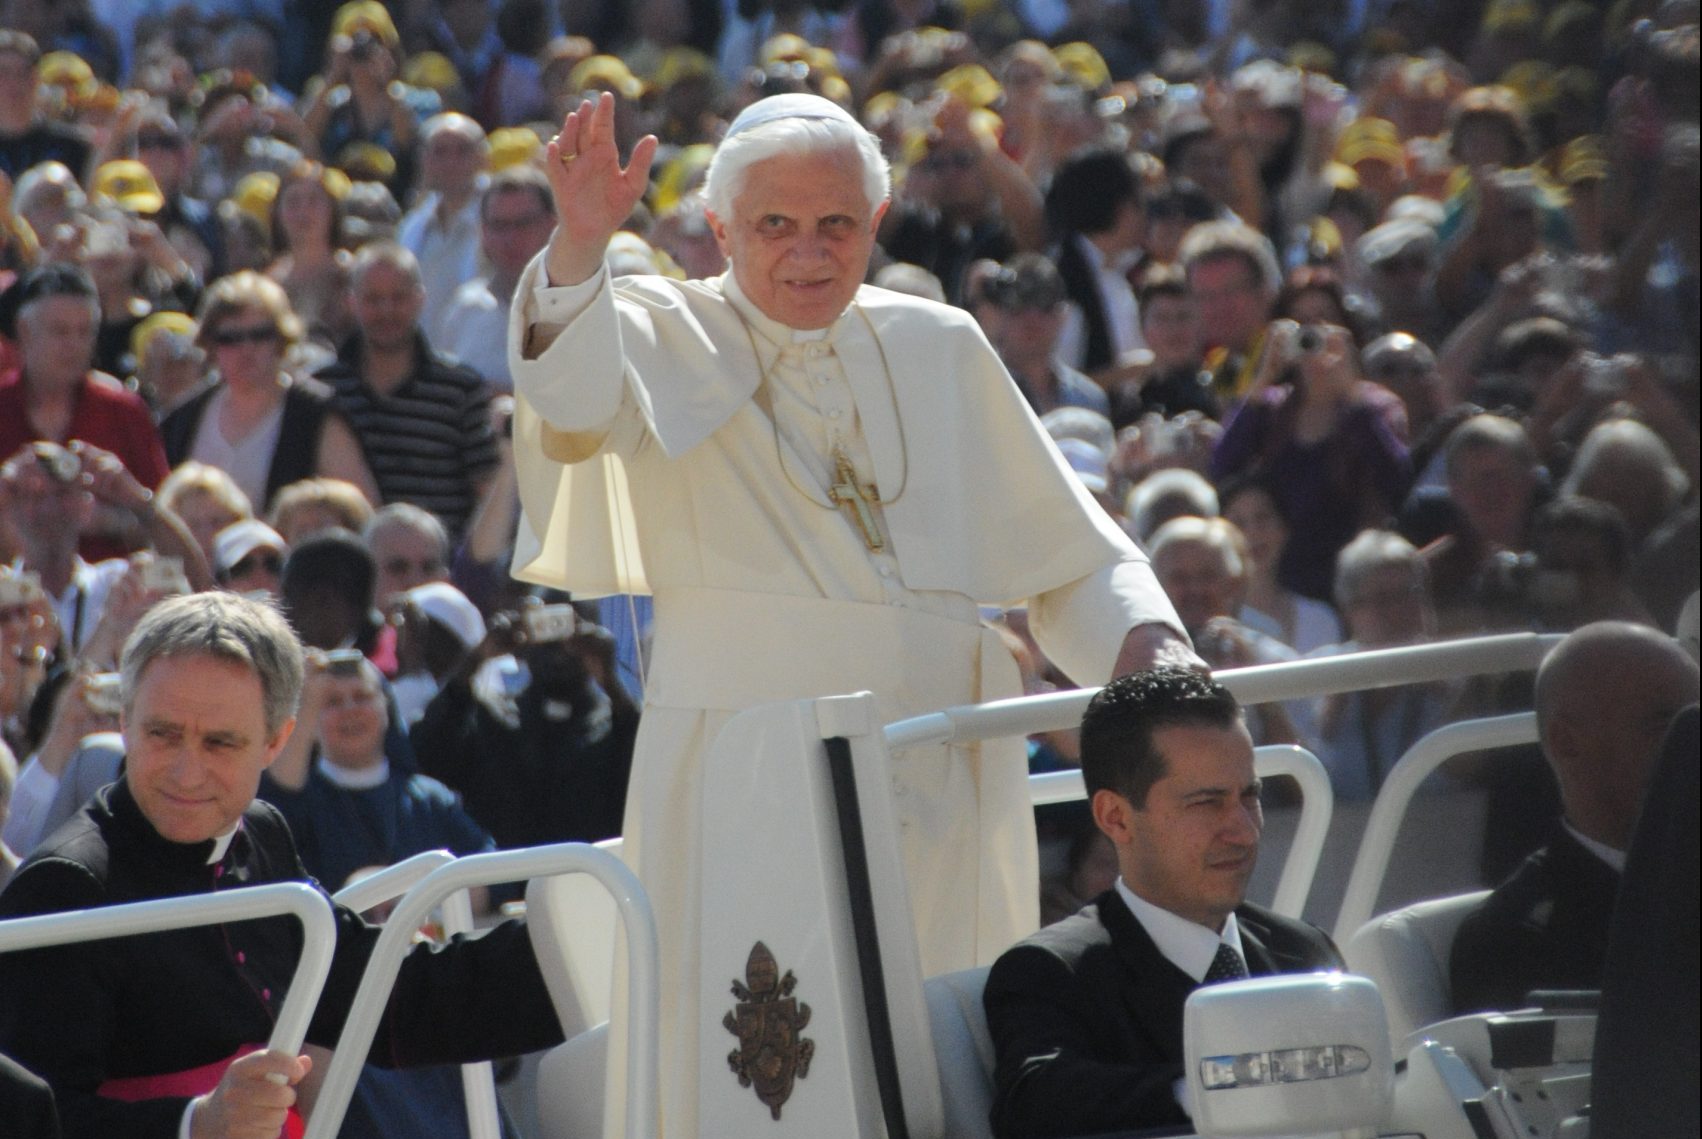 Pope Benedict XVI at the 2009 Africa Synod in Rome.